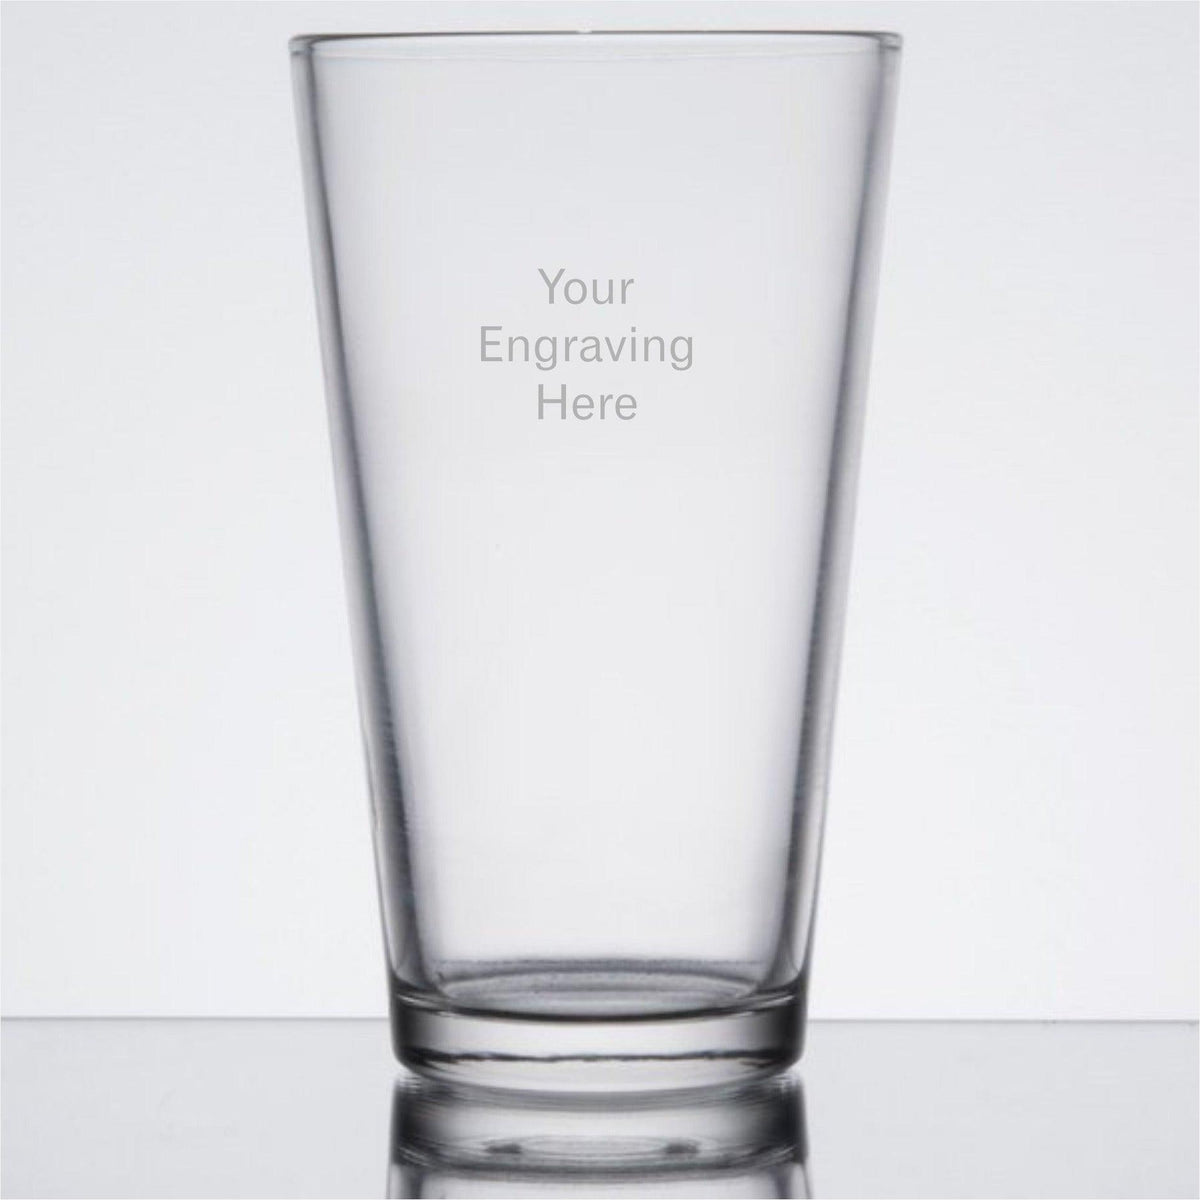 glass barware pint glass with "you're engraving here" text